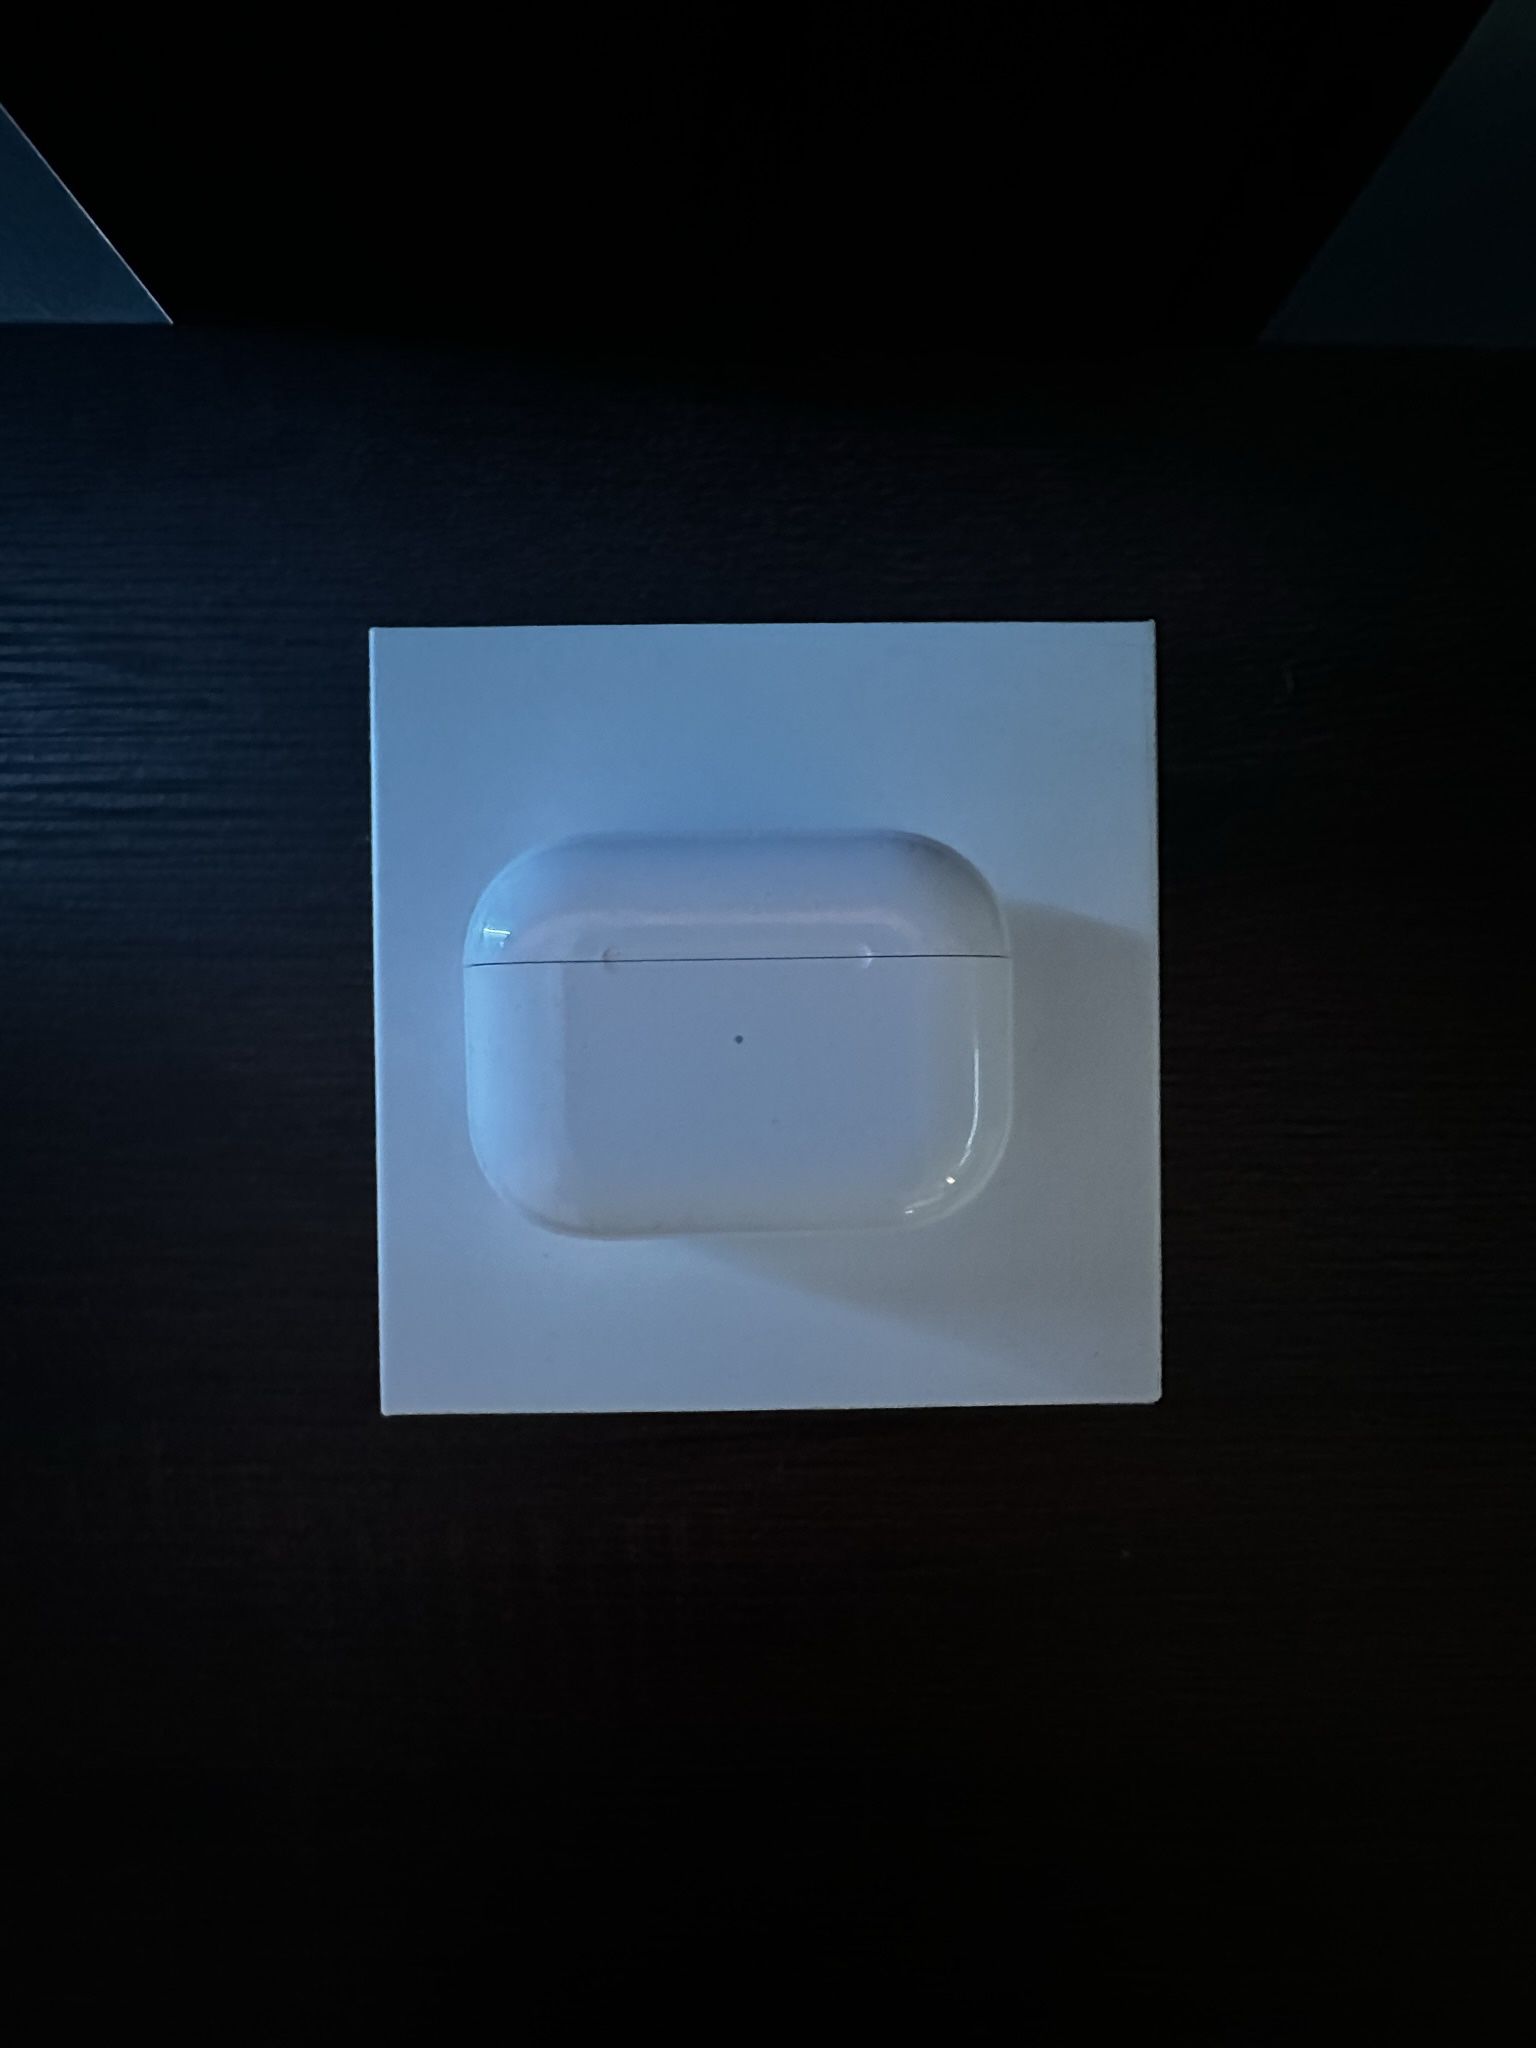 airpods pro 2nd generation 